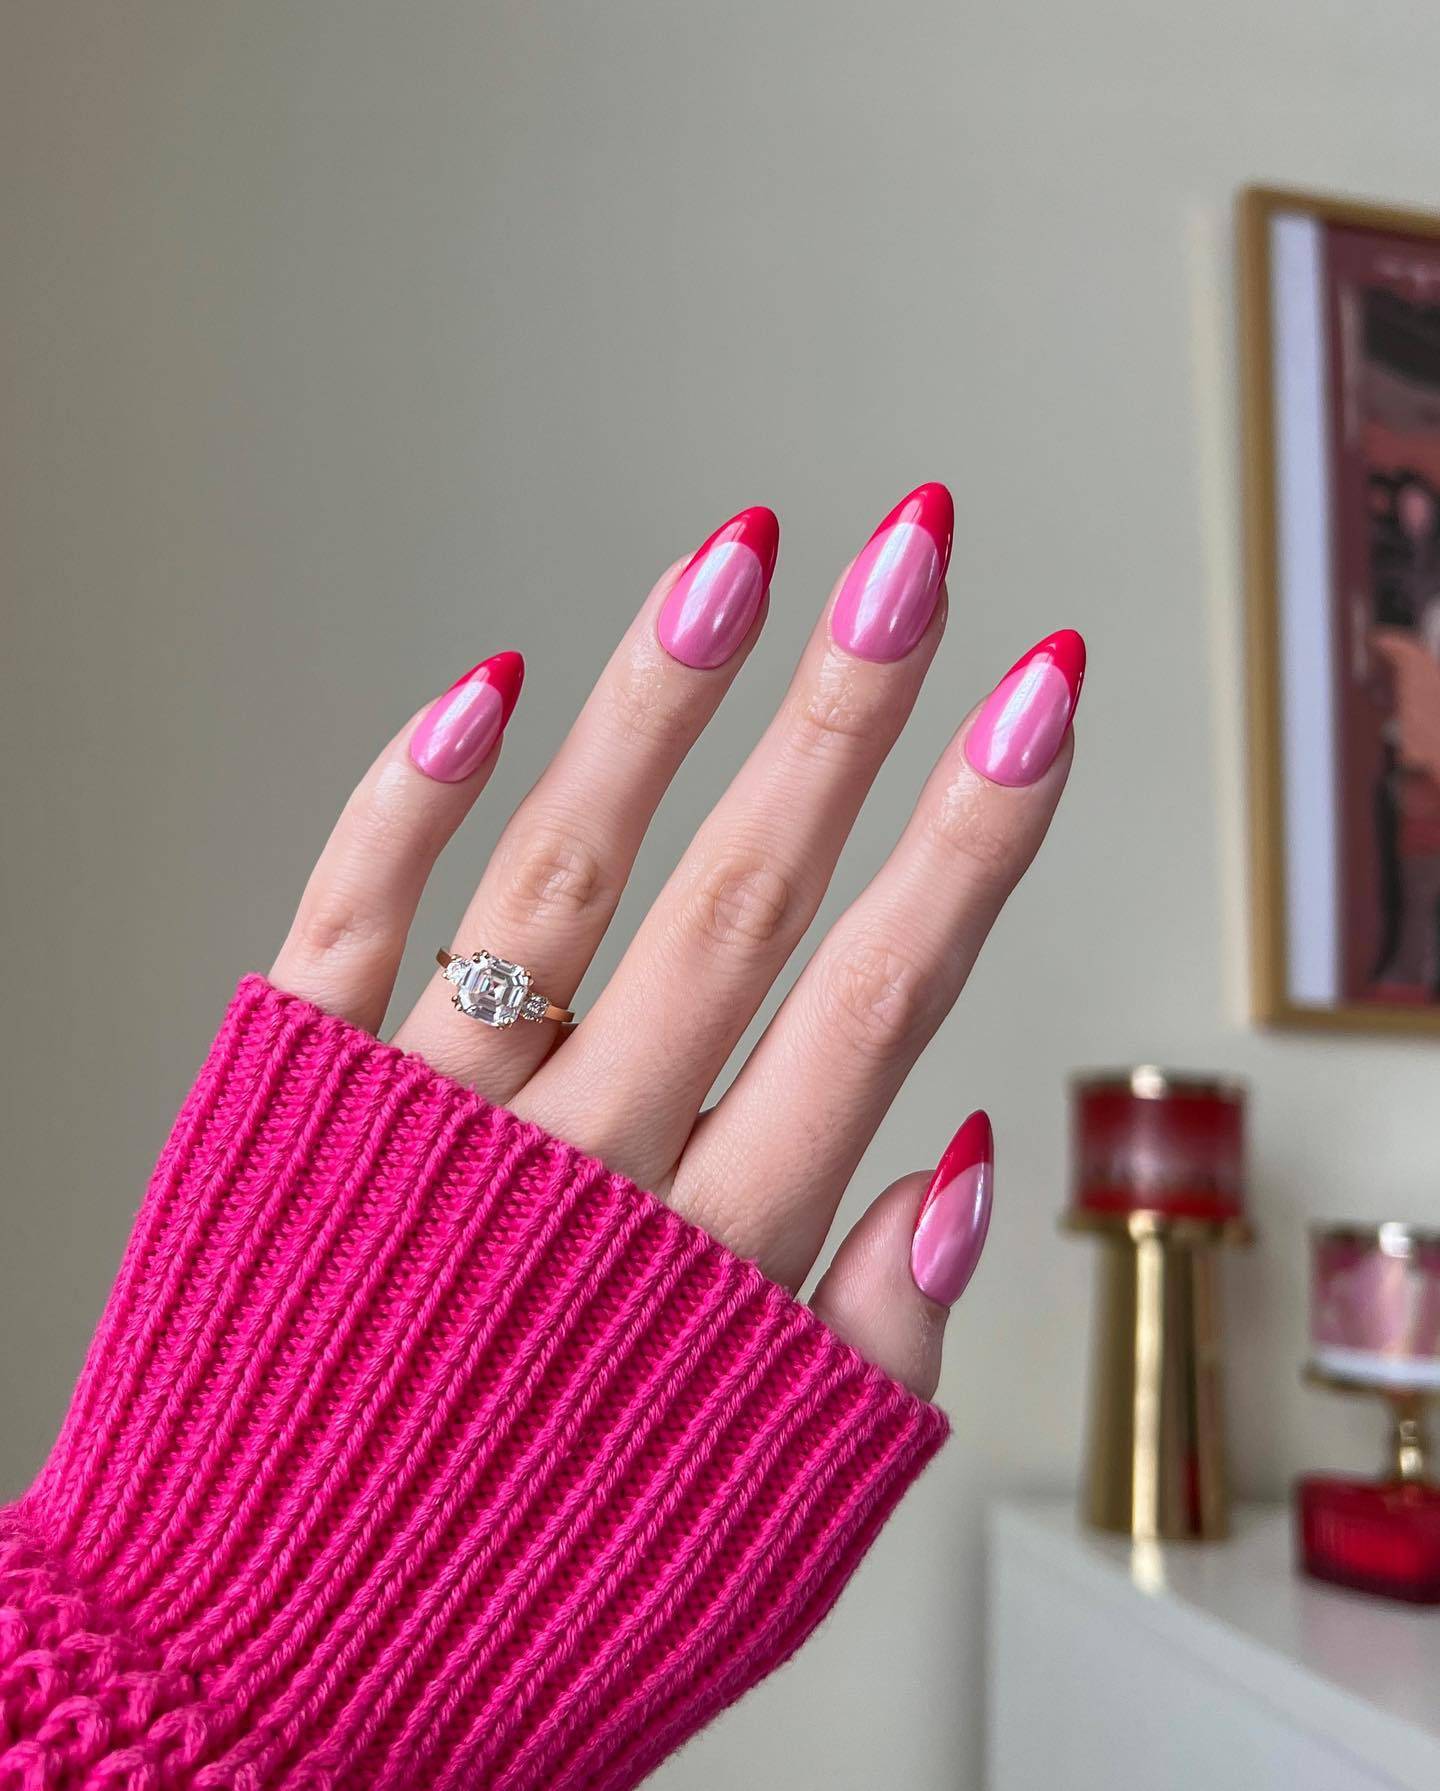 30 Chic Chrome Nail Designs For The Ultimate Glam Look - 249